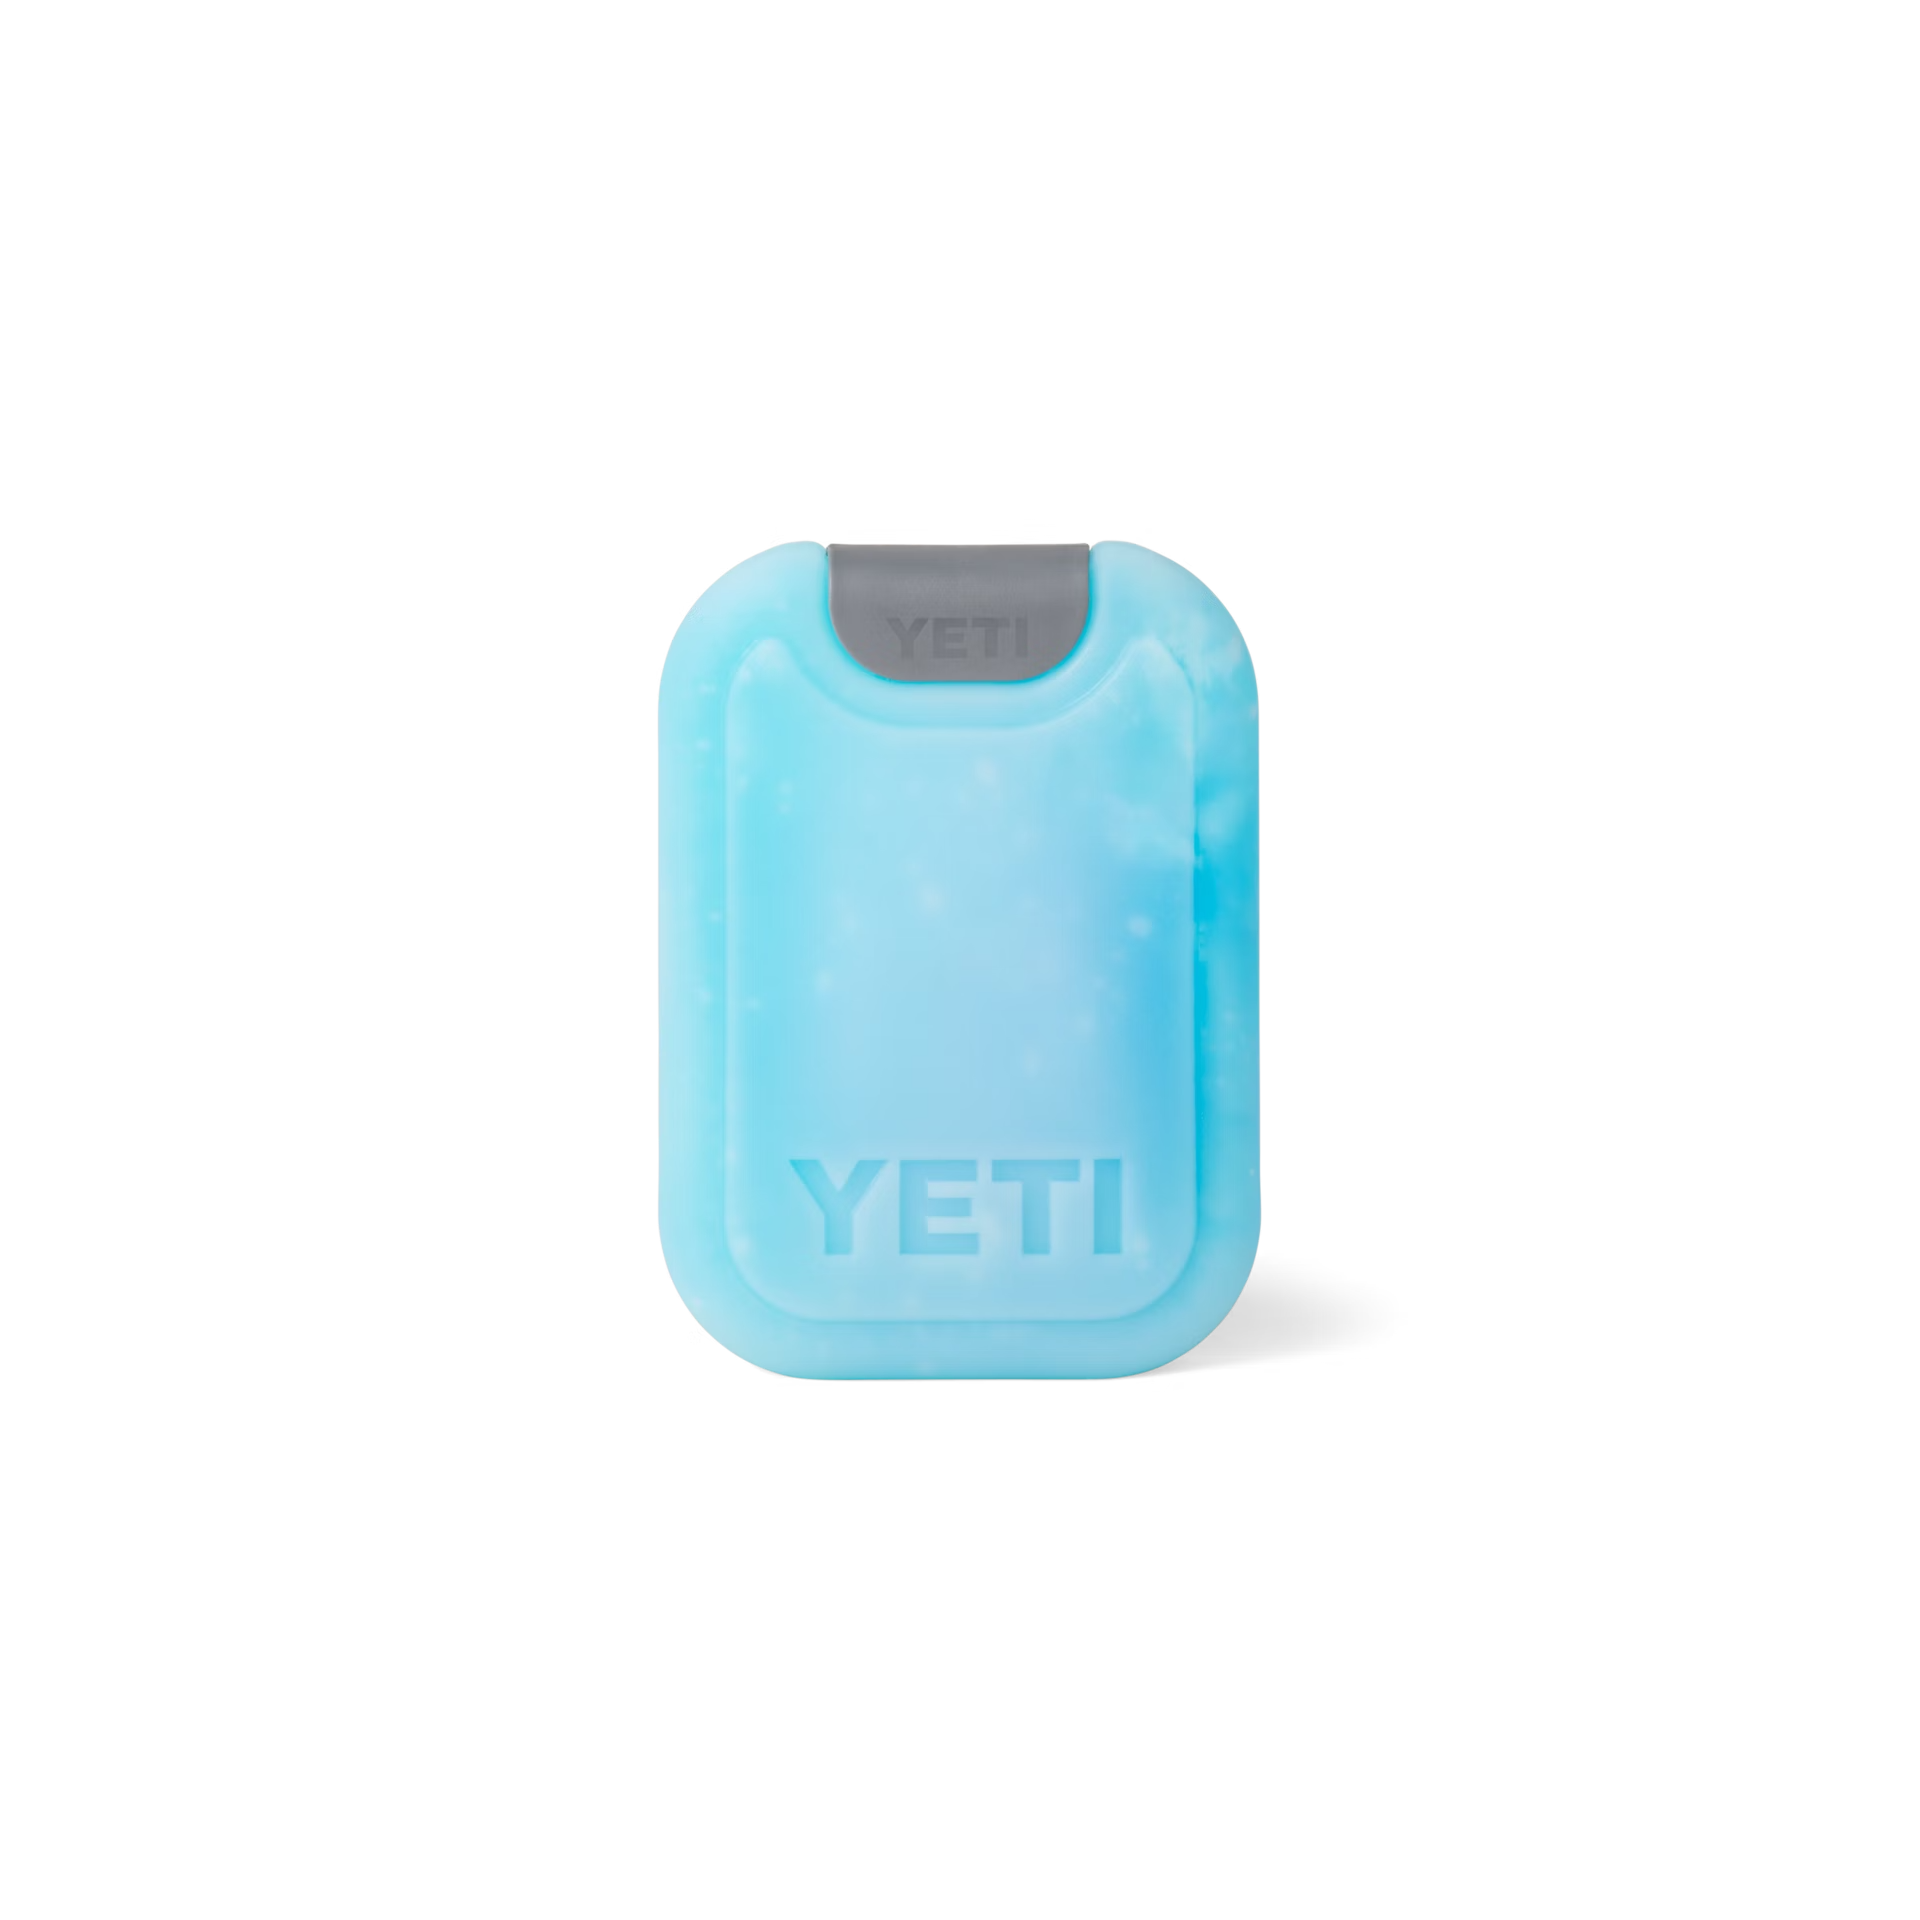 YETI: New YETI Thin Ice: Go Ahead And Pack It In